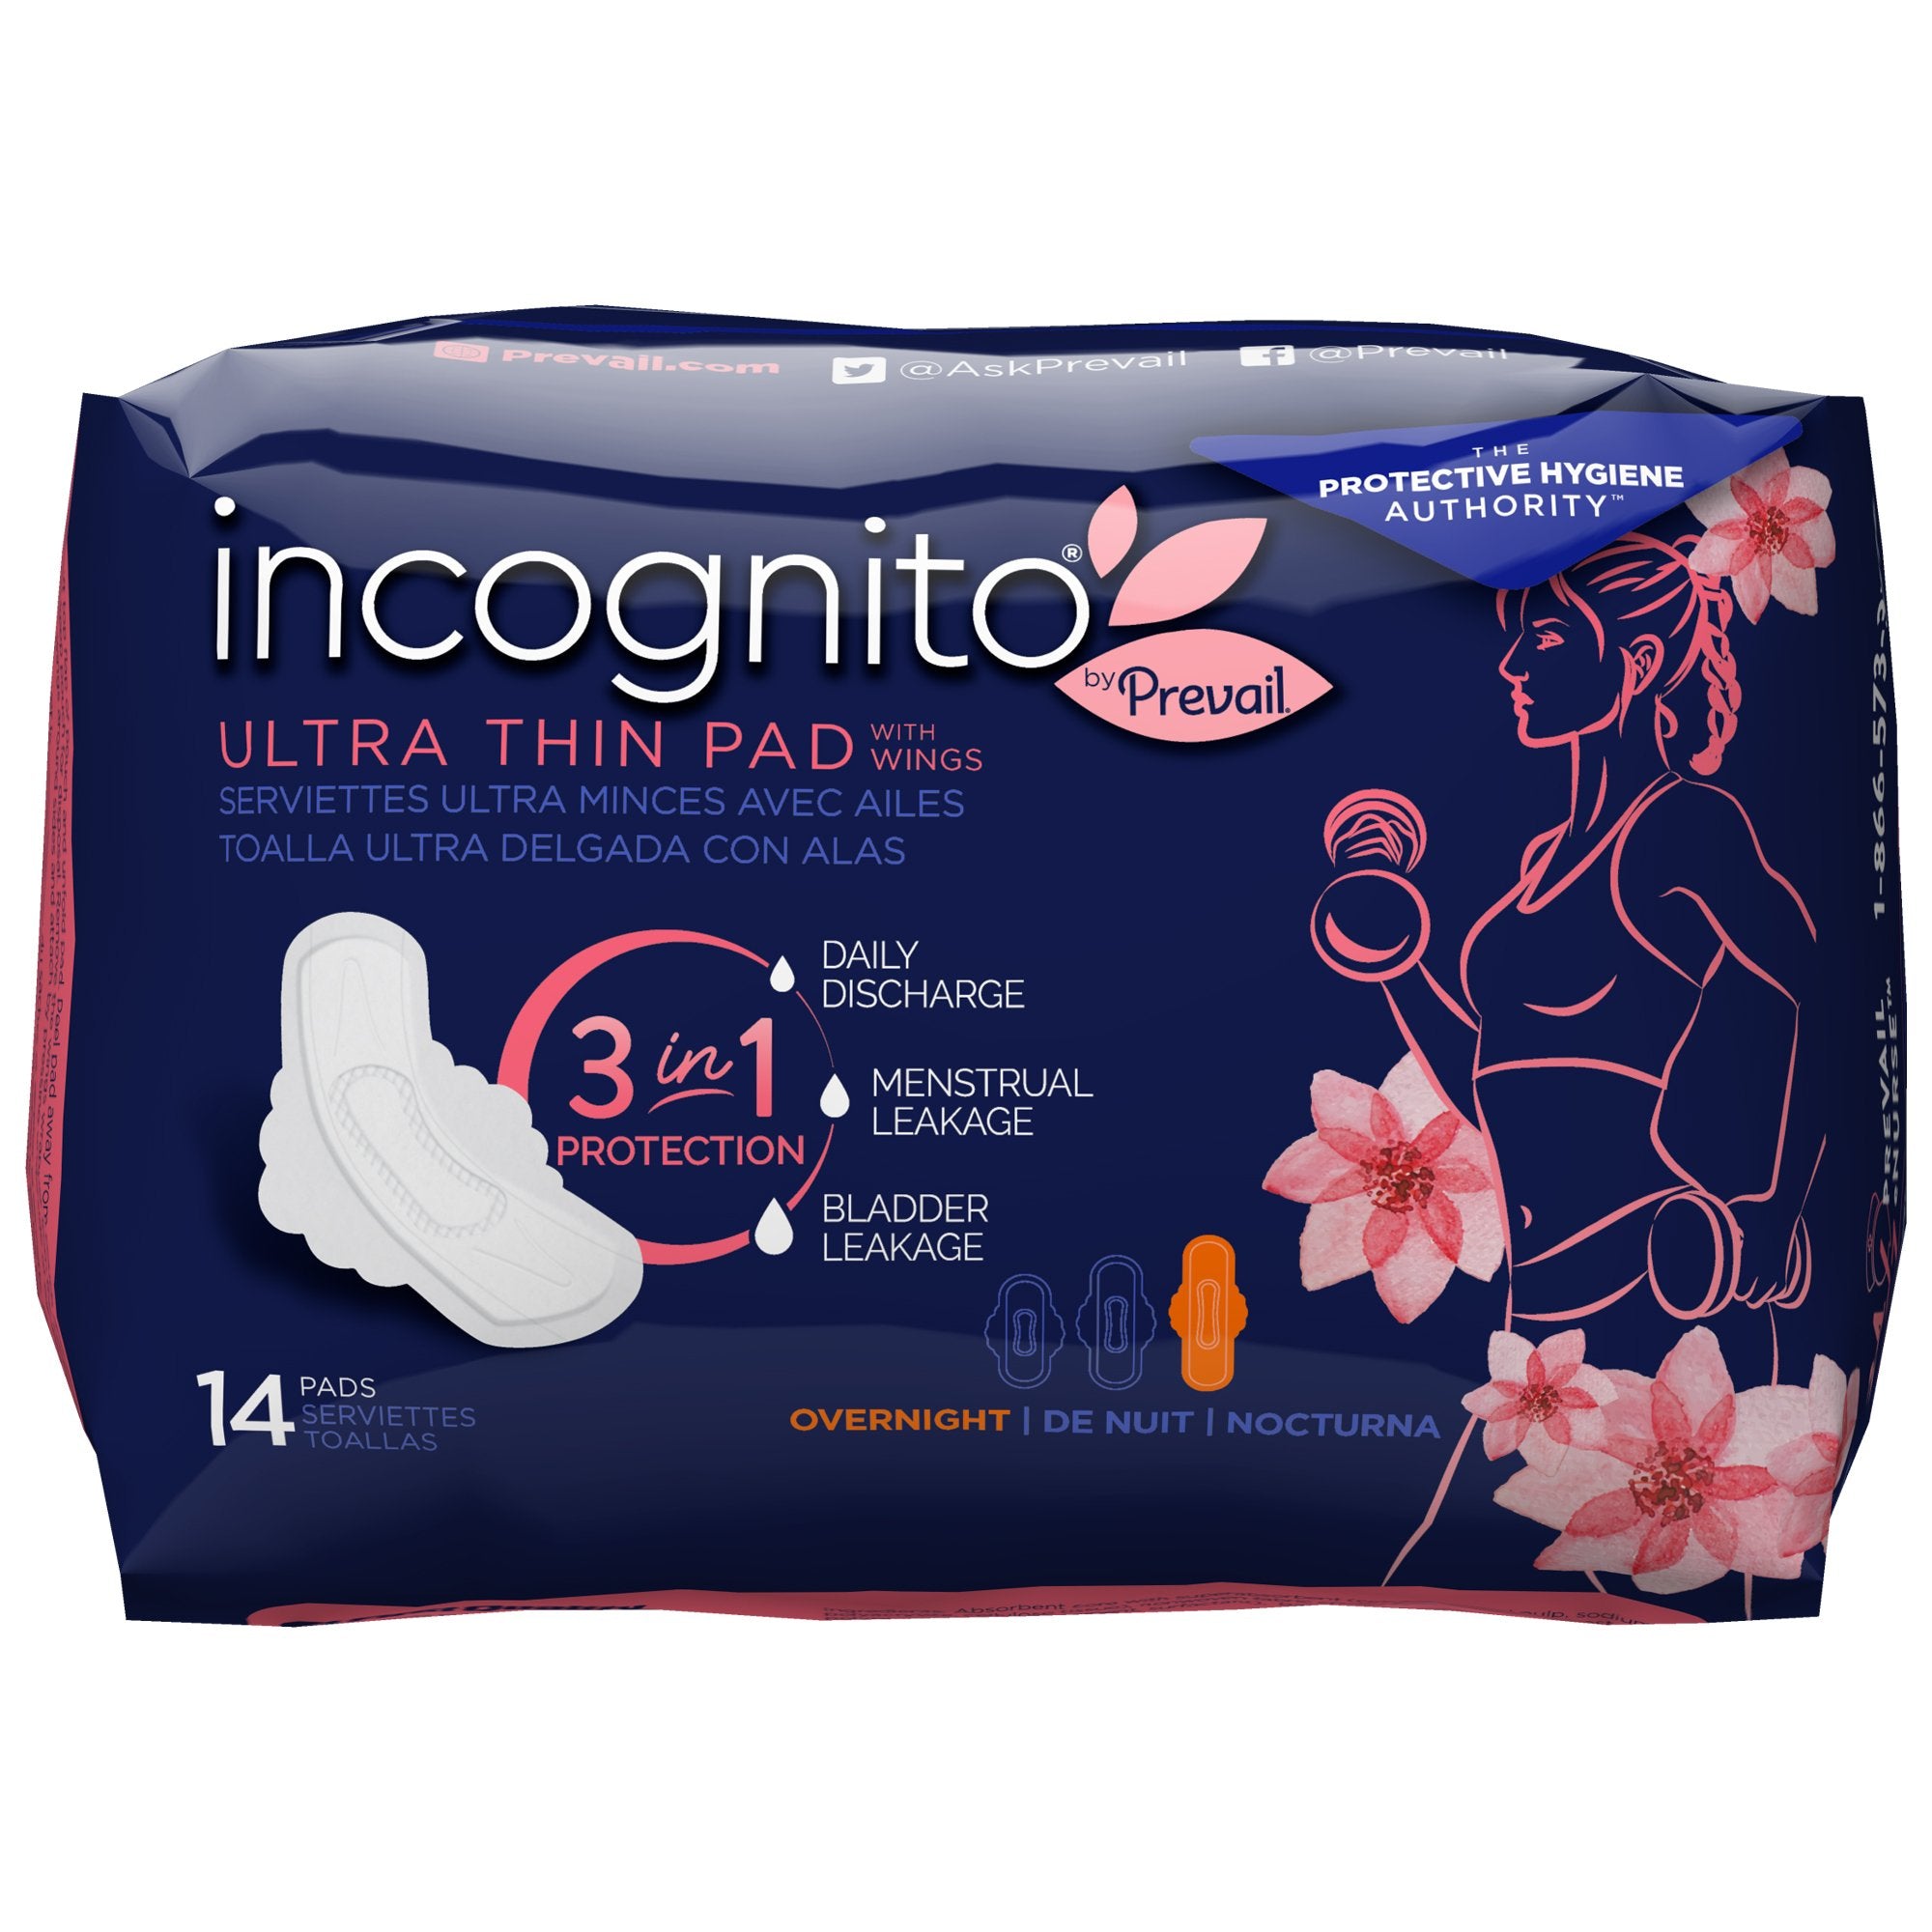 Feminine Pad incognito® by Prevail Ultra Thin with Wings / Overnight Heavy Absorbency